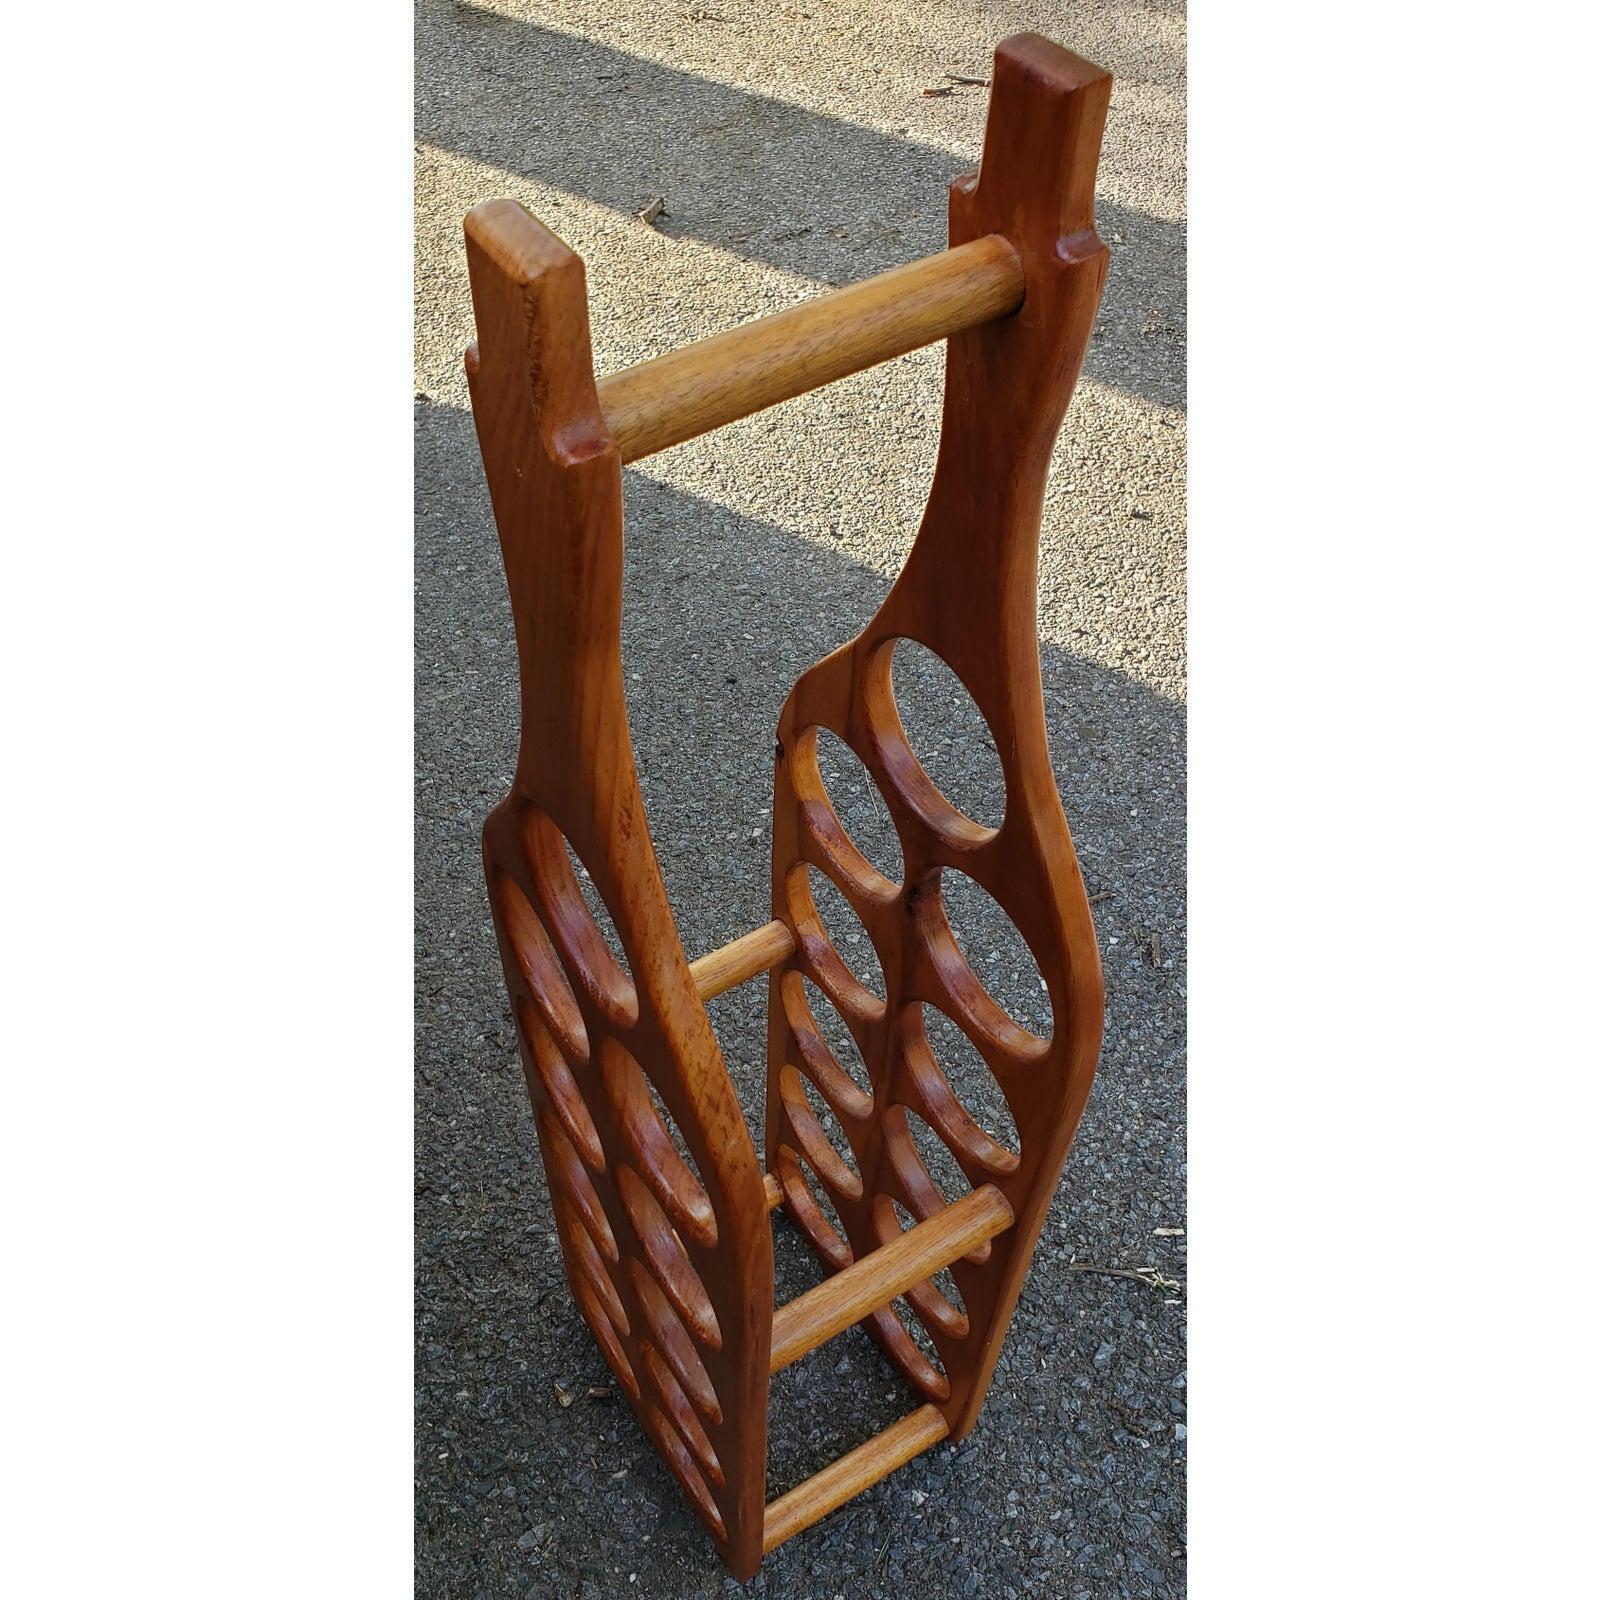 Vintage wood wine rack in the Form of a wine bottle after Shoemaker.
Holds 11 bottles of wine. It is in great condition. Has been refinished.
It measures 10